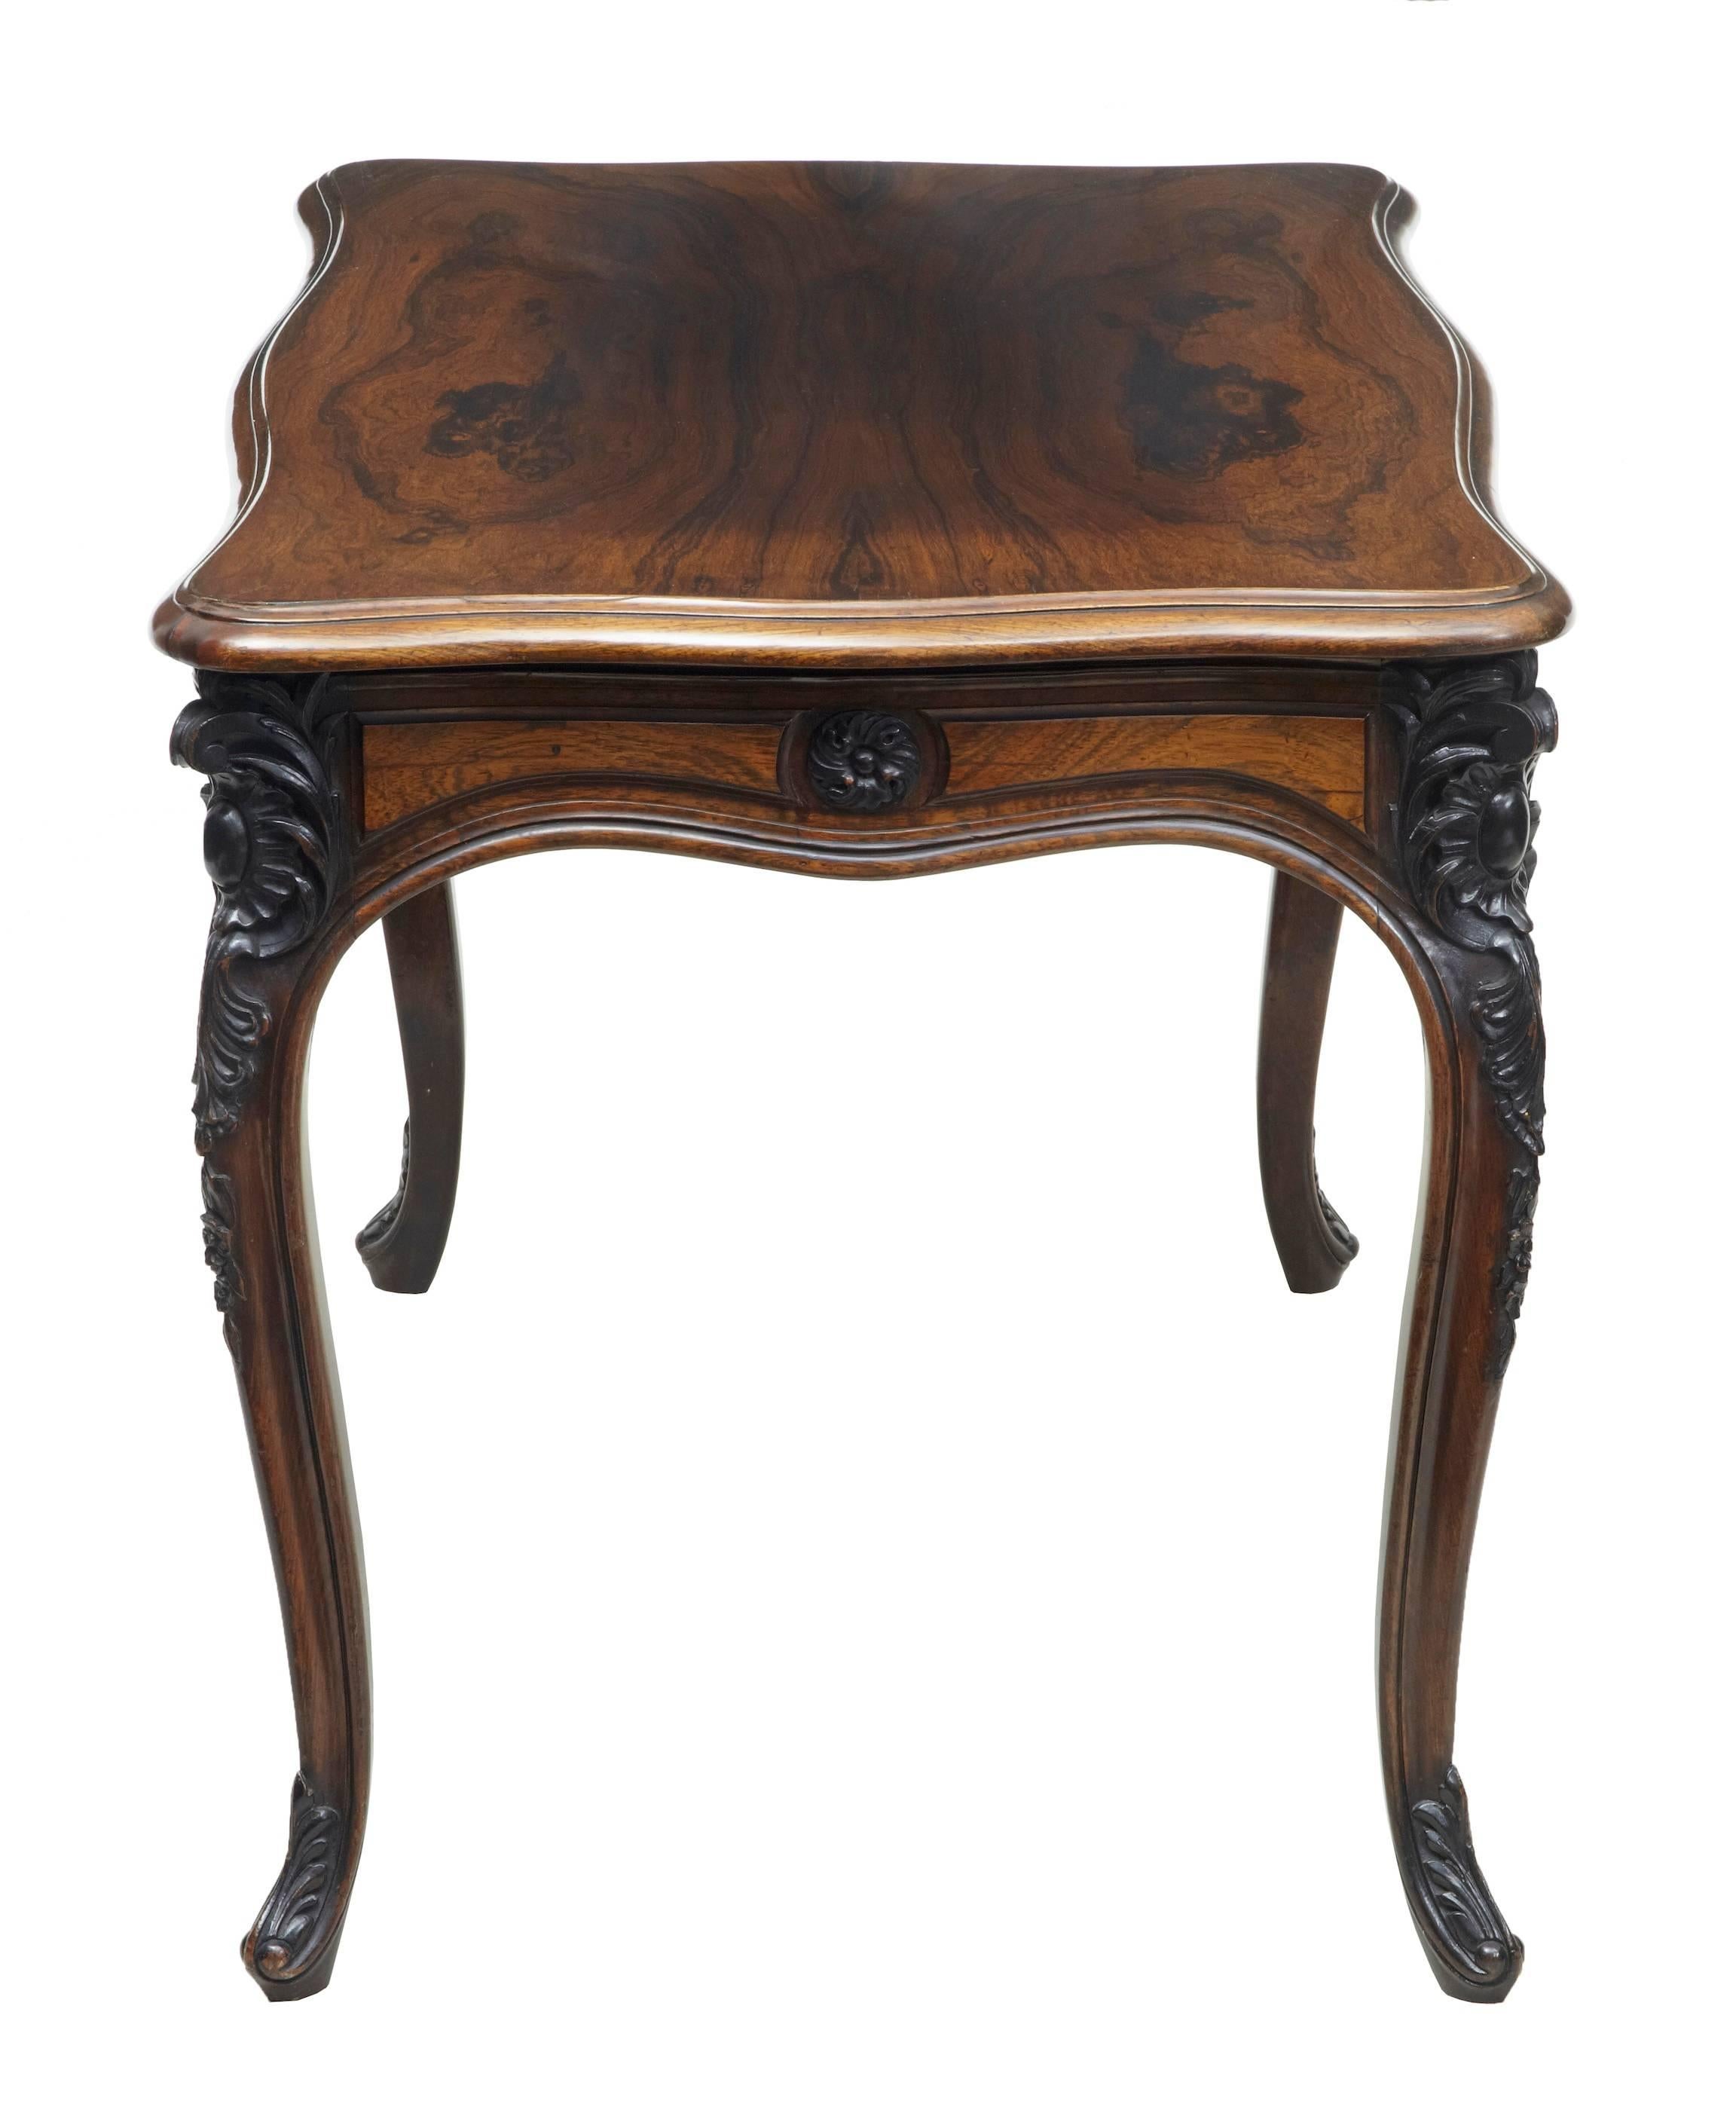 European 19th Century Carved Rosewood Occasional Table